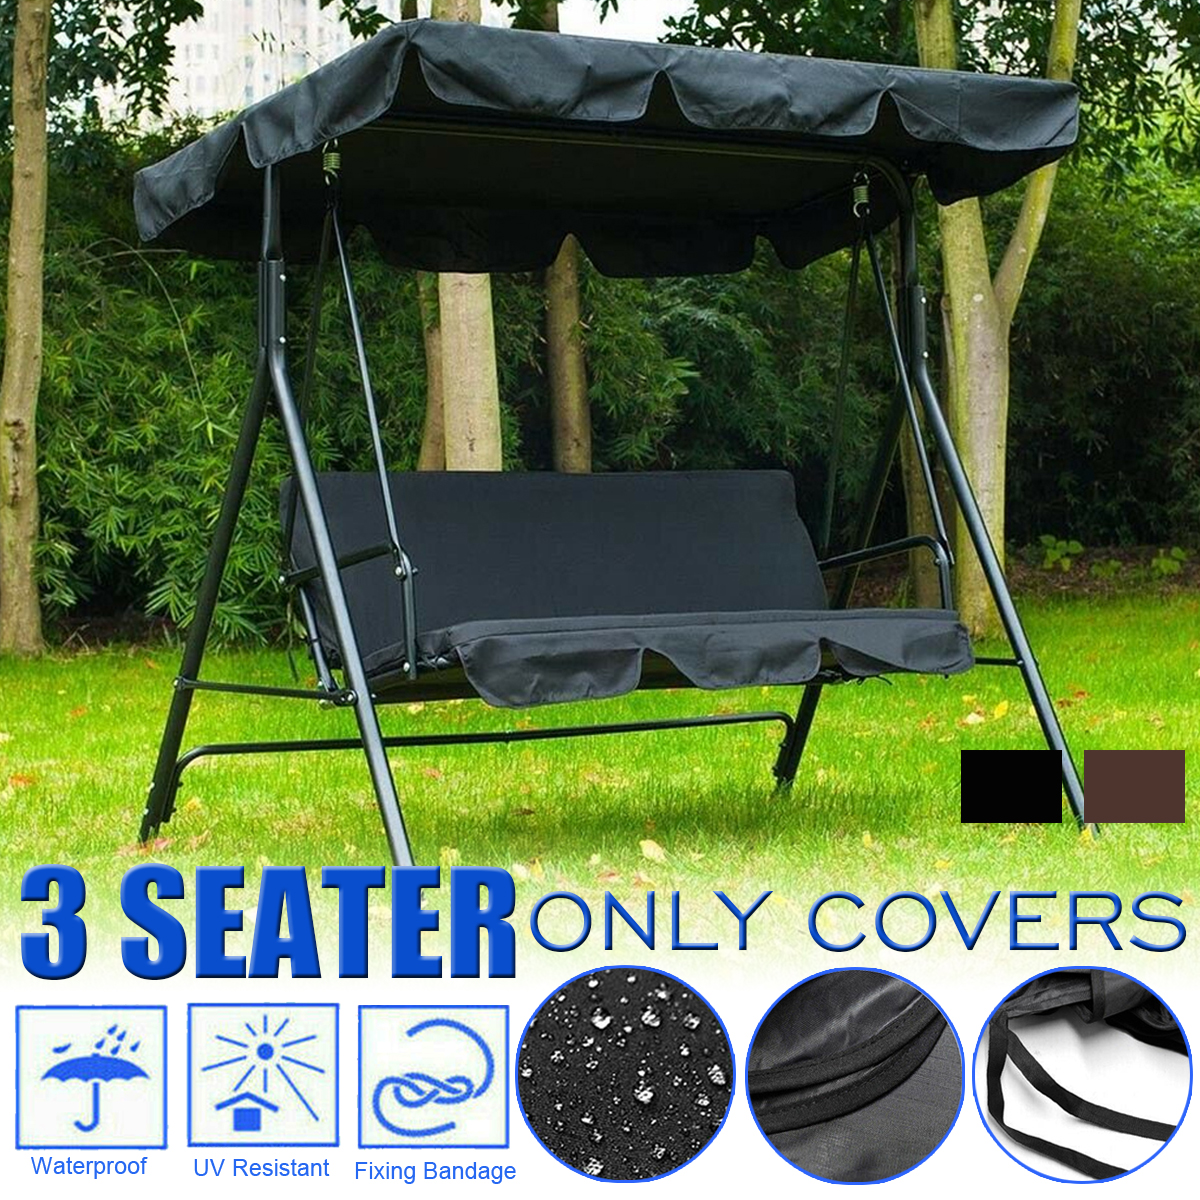 2 & 3 Seater Canopy Cover for Garden Swing Seat Replacement Spare Waterproof 